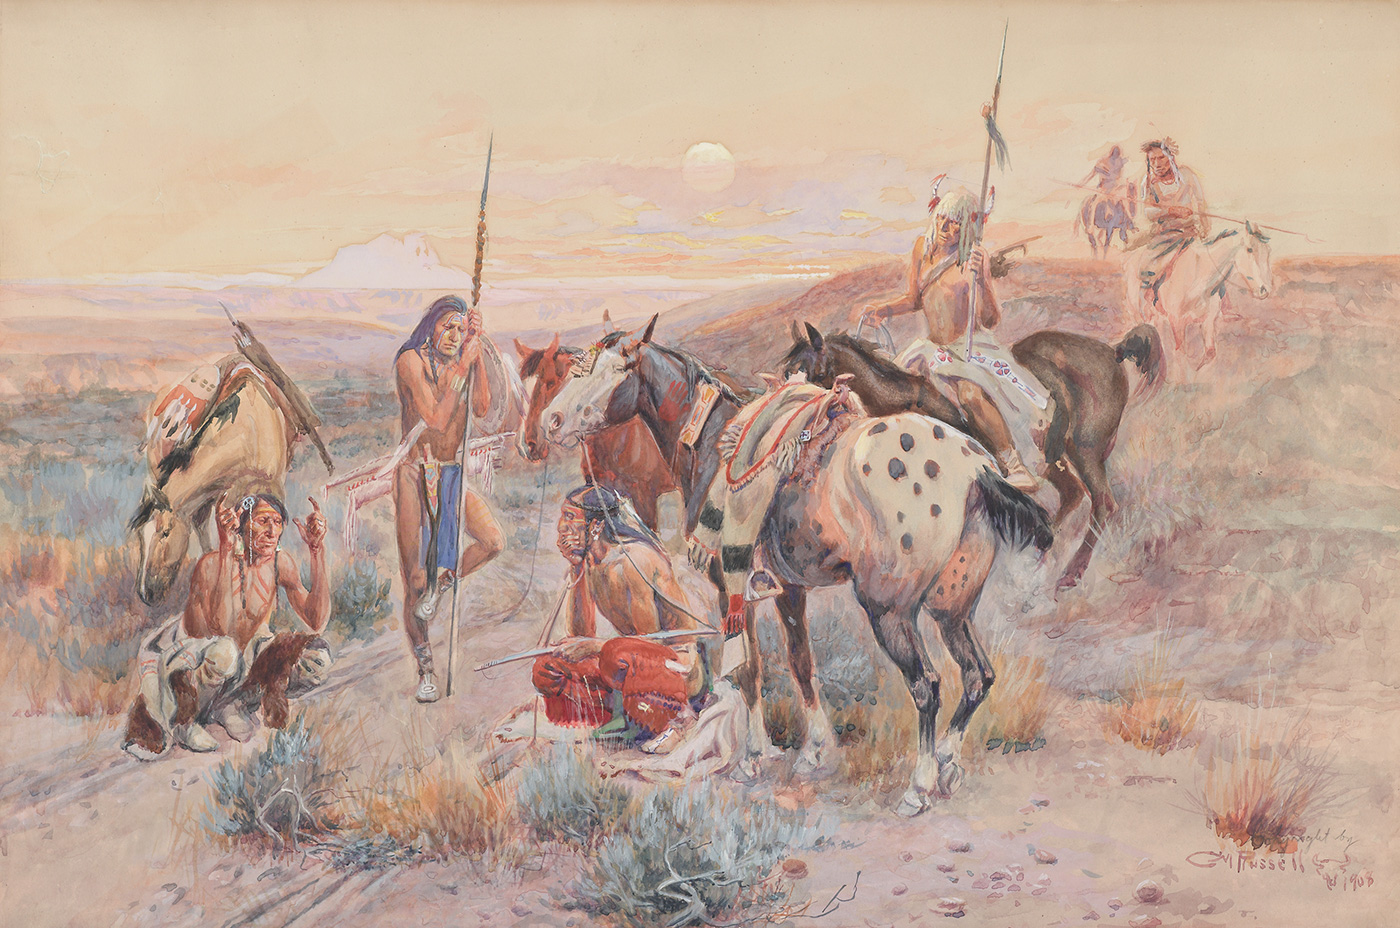 A group of indigenous American men with horses gather around linear tracks on the ground.